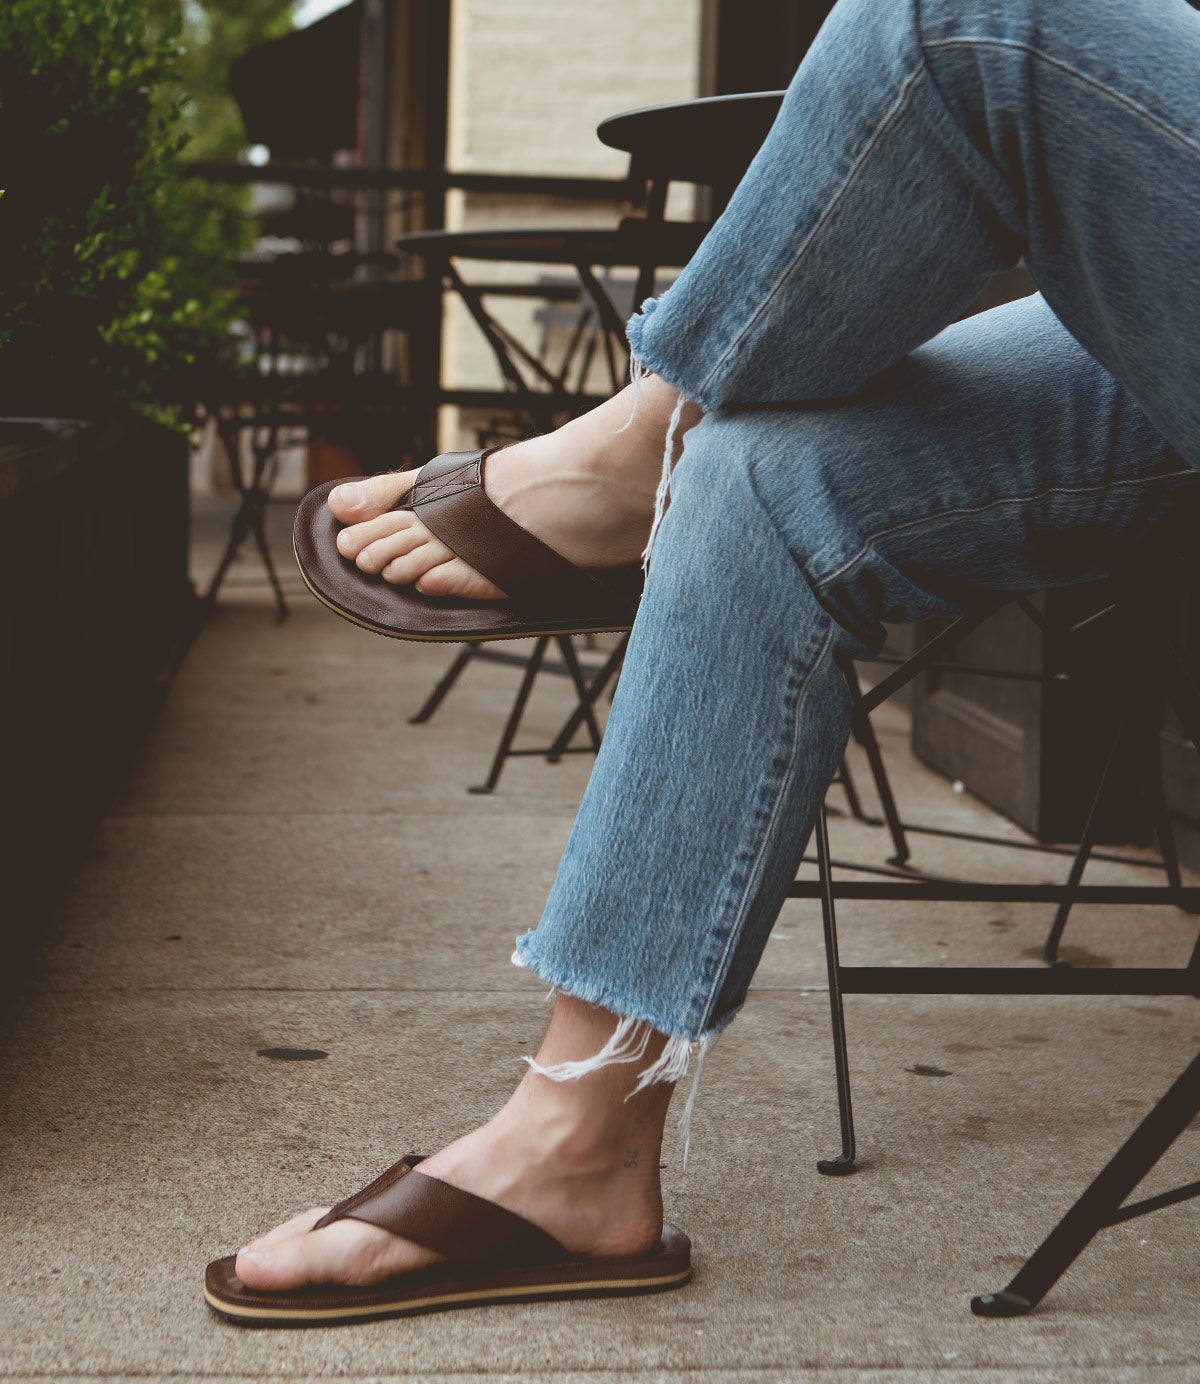 A person wearing Townfolk jeans and distressed leather sandals by Roan is seated outdoors with legs crossed on a patio with metal chairs and tables, adding a touch of rustic charm.